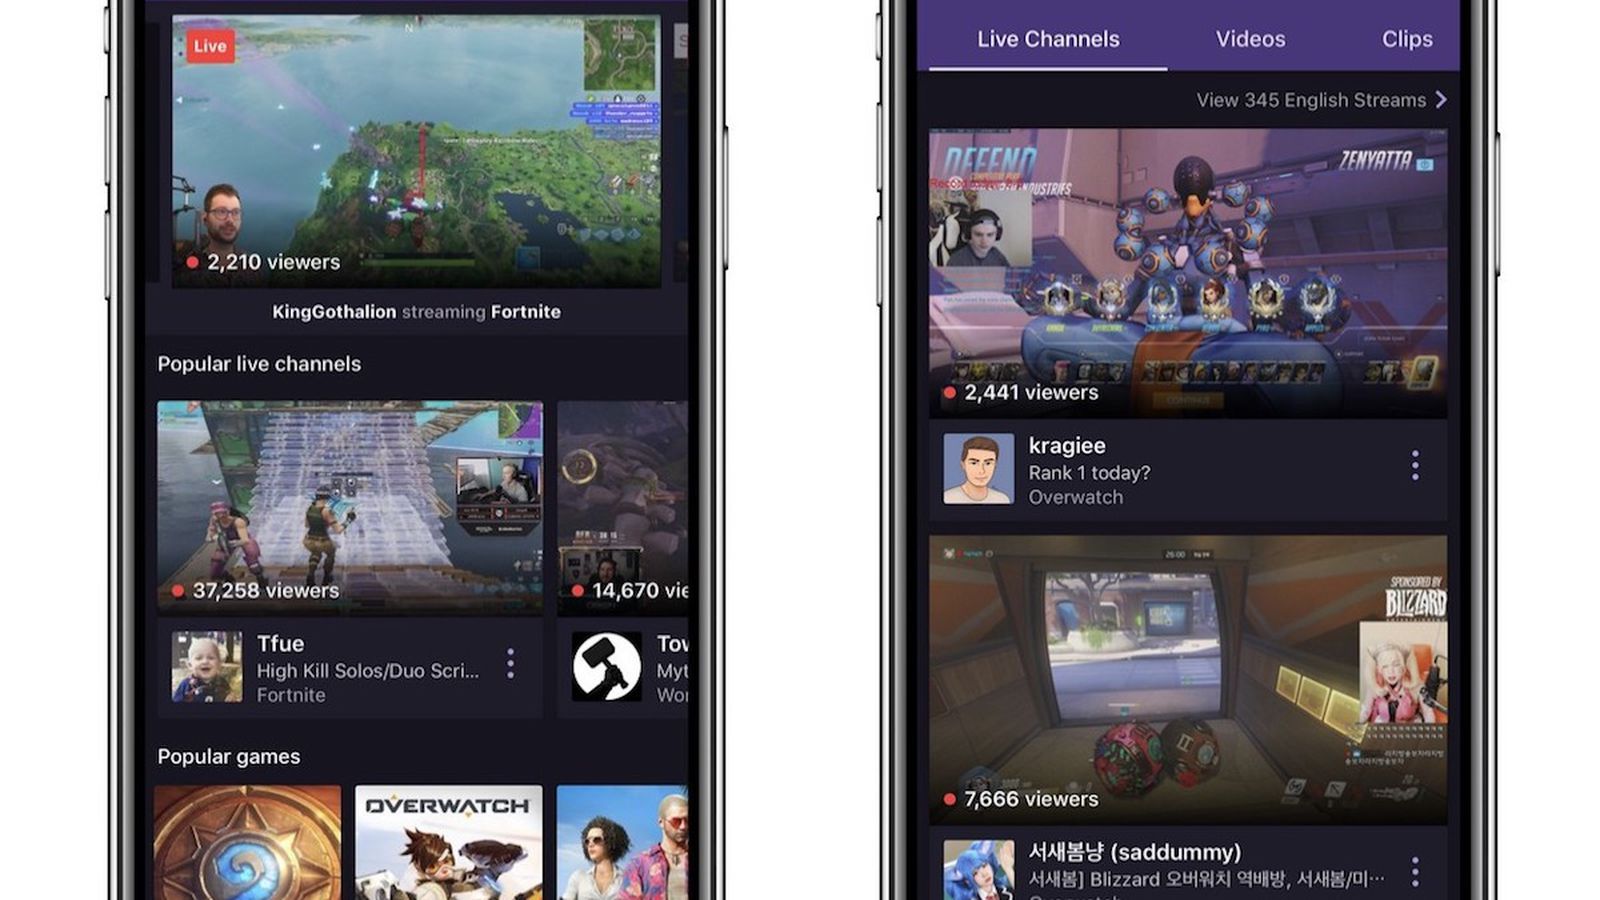 Twitch: Live Game Streaming on the App Store